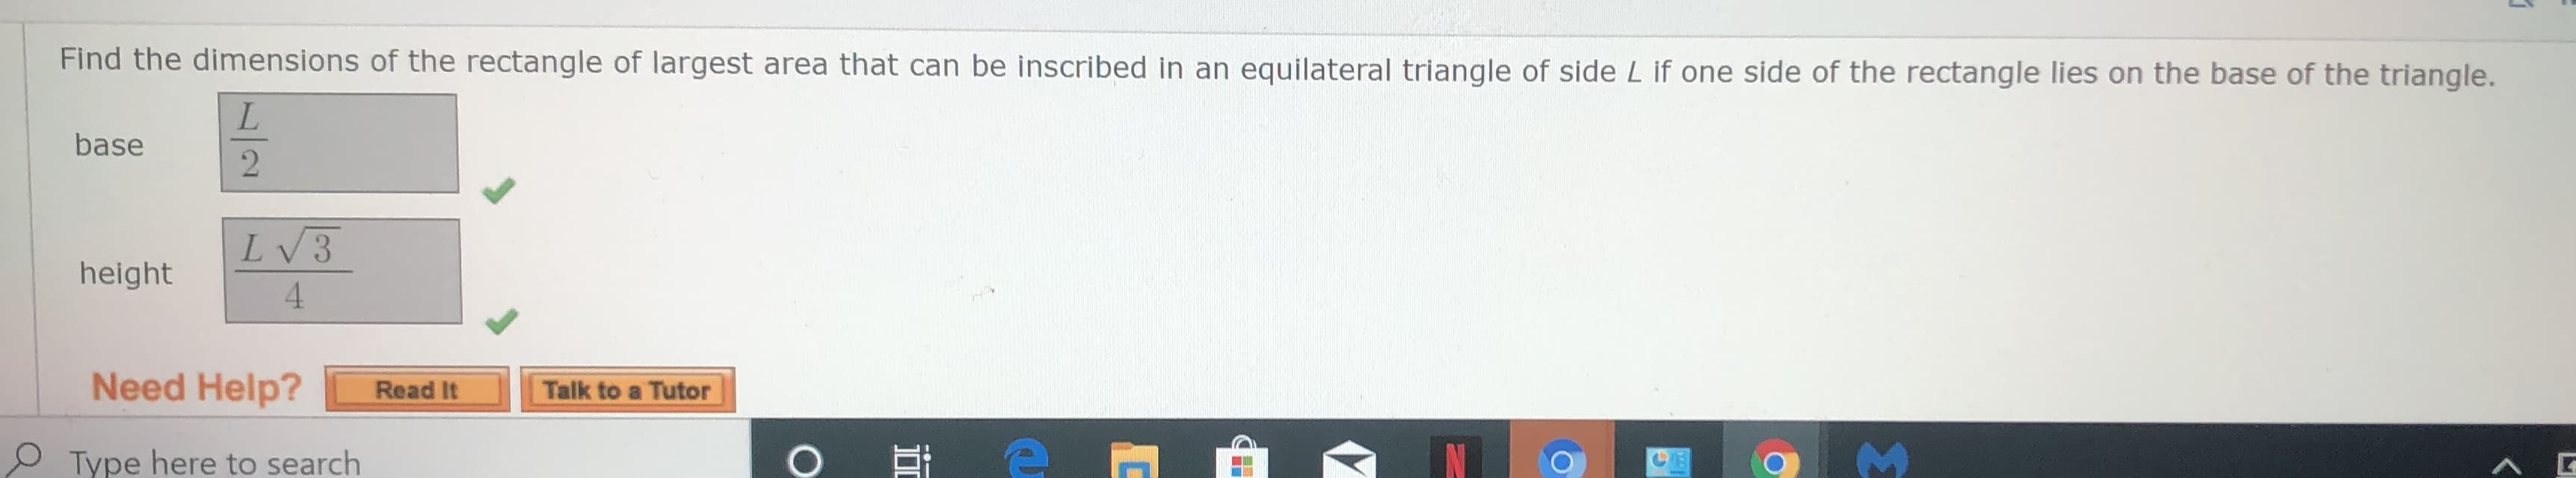 Find the dimensions of the rectangle of largest area that can be inscribed in an equilateral triangle of side L if one side of the rectangle lies on the base of the triangle.
L.
base
LV3
height
4.
Need Help?
Read It
Talk to a Tutor
Type here to search
/2
